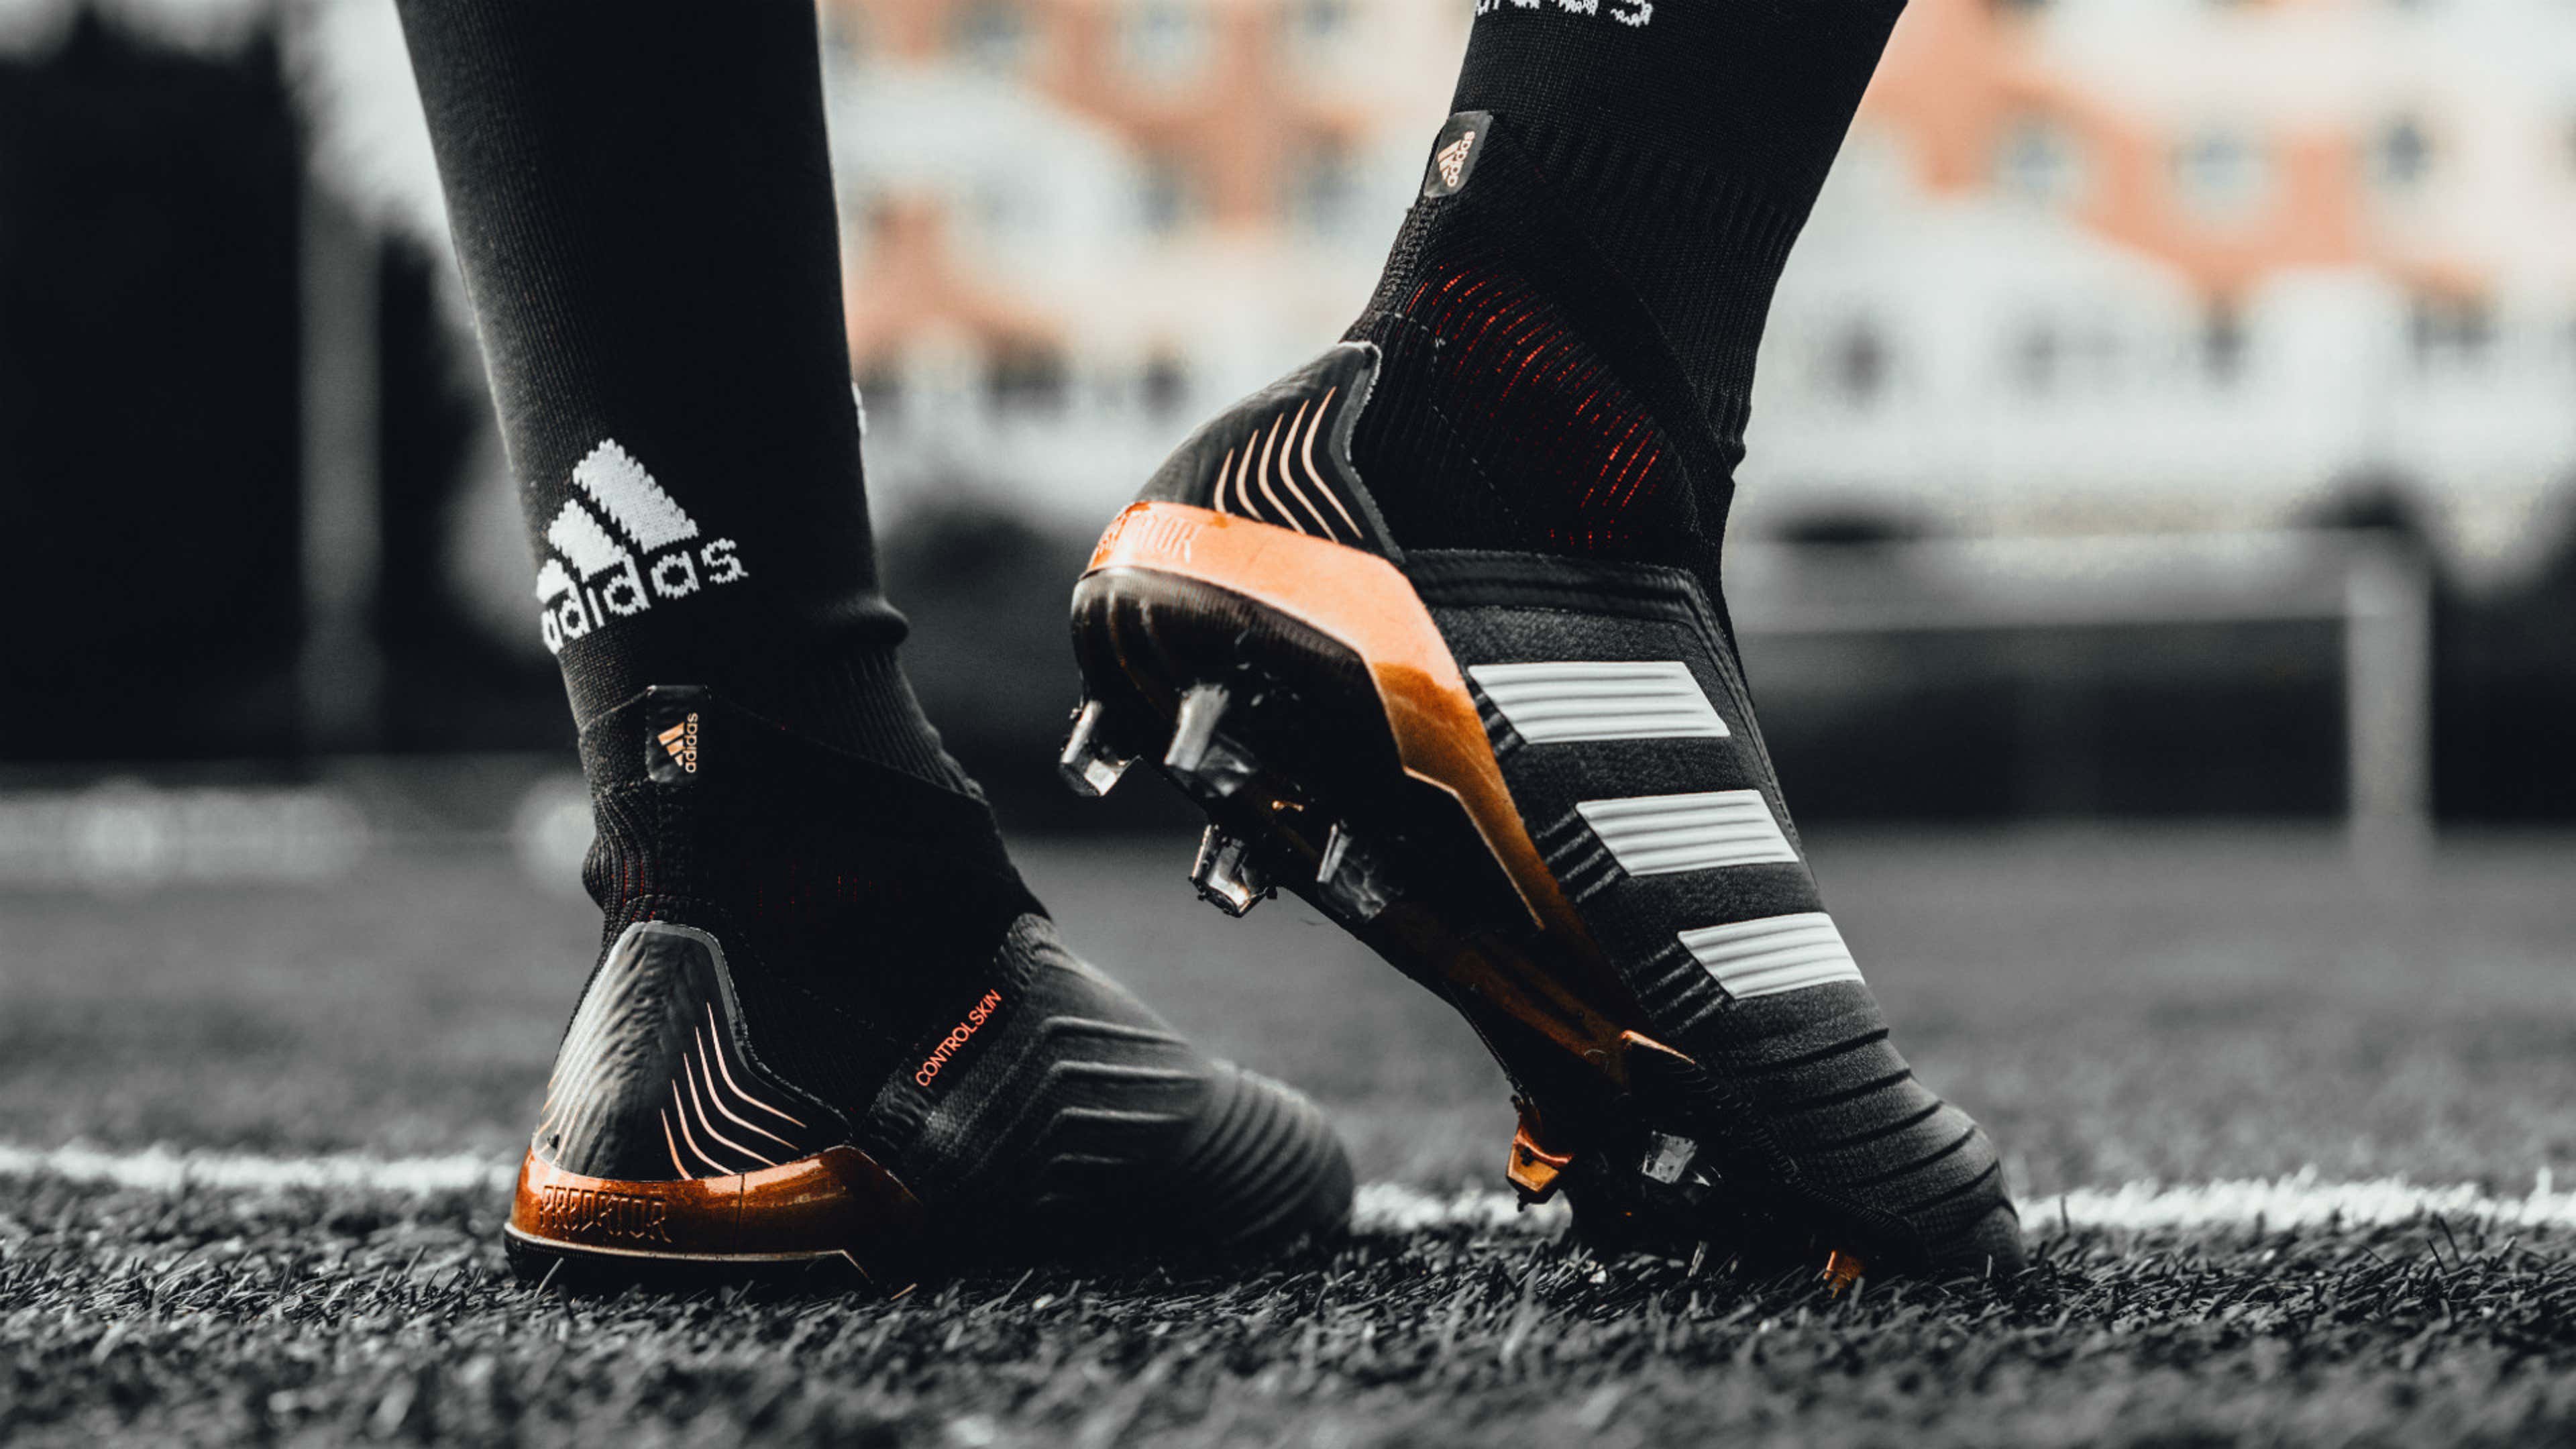 Adidas Predator 18+: Iconic boots re-launched for Pogba, Ozil & Dele ...